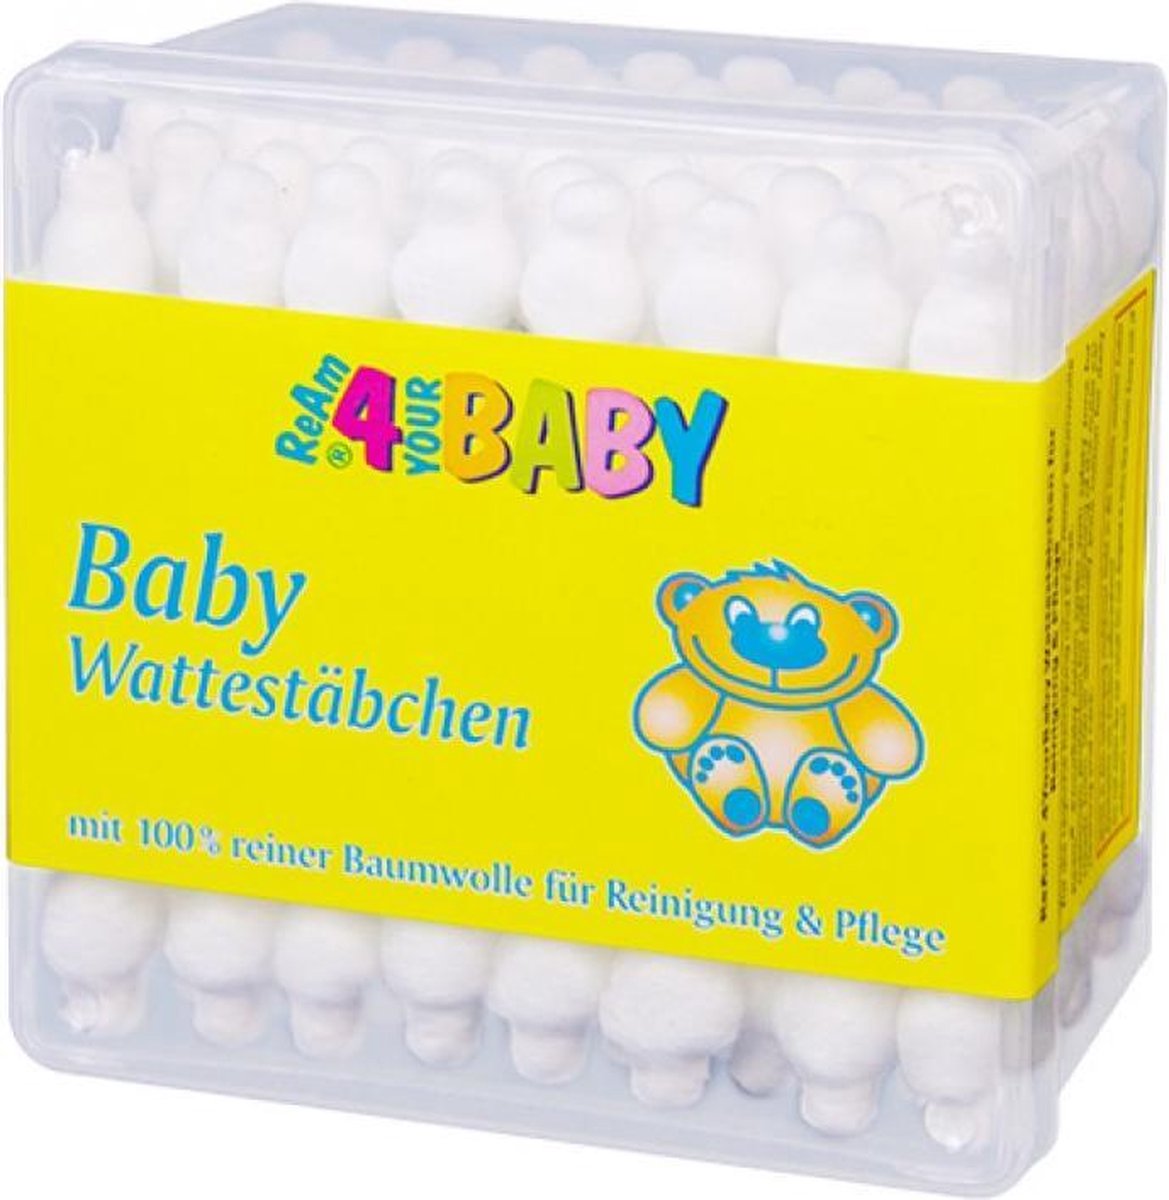 Cotton Swabs Baby 55Pcs In Box